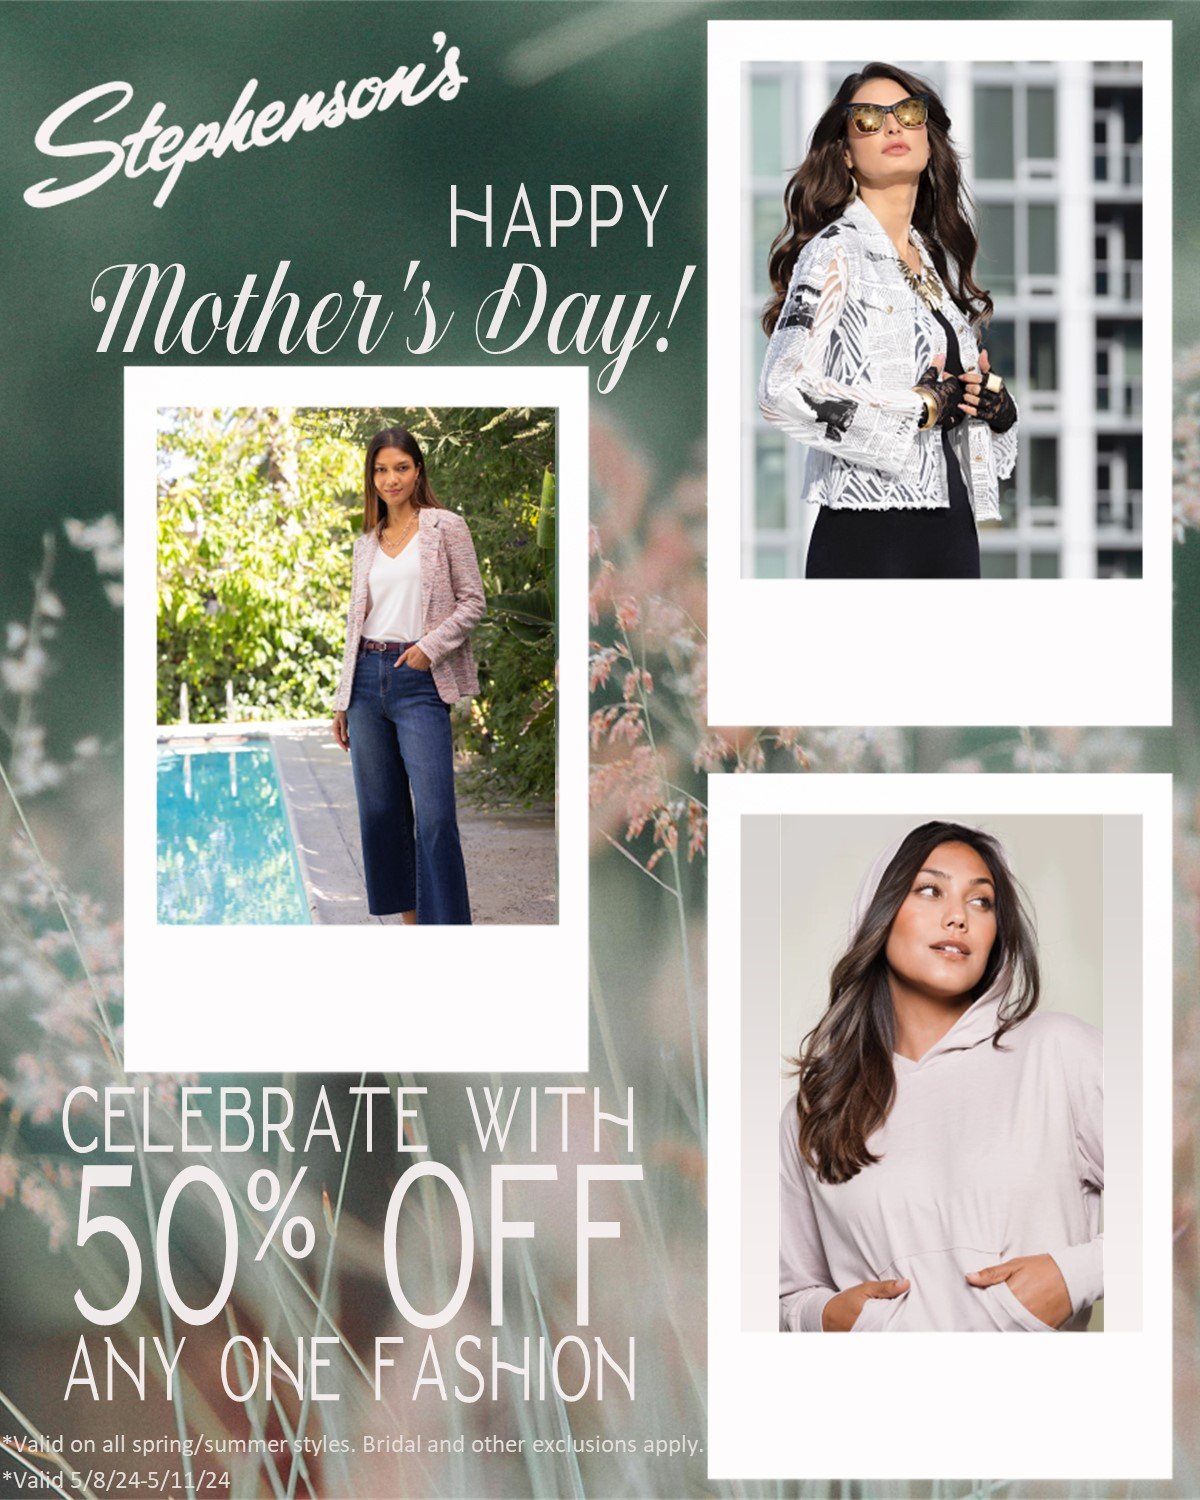 Friendly reminder that this Sunday is Mother's Day! No matter what her style, find her a gift that she'll love, at a price that you'll love! Make this mother's day one to remember... Visit us this week and save 50% on any fashion!

Treat mom, or trea